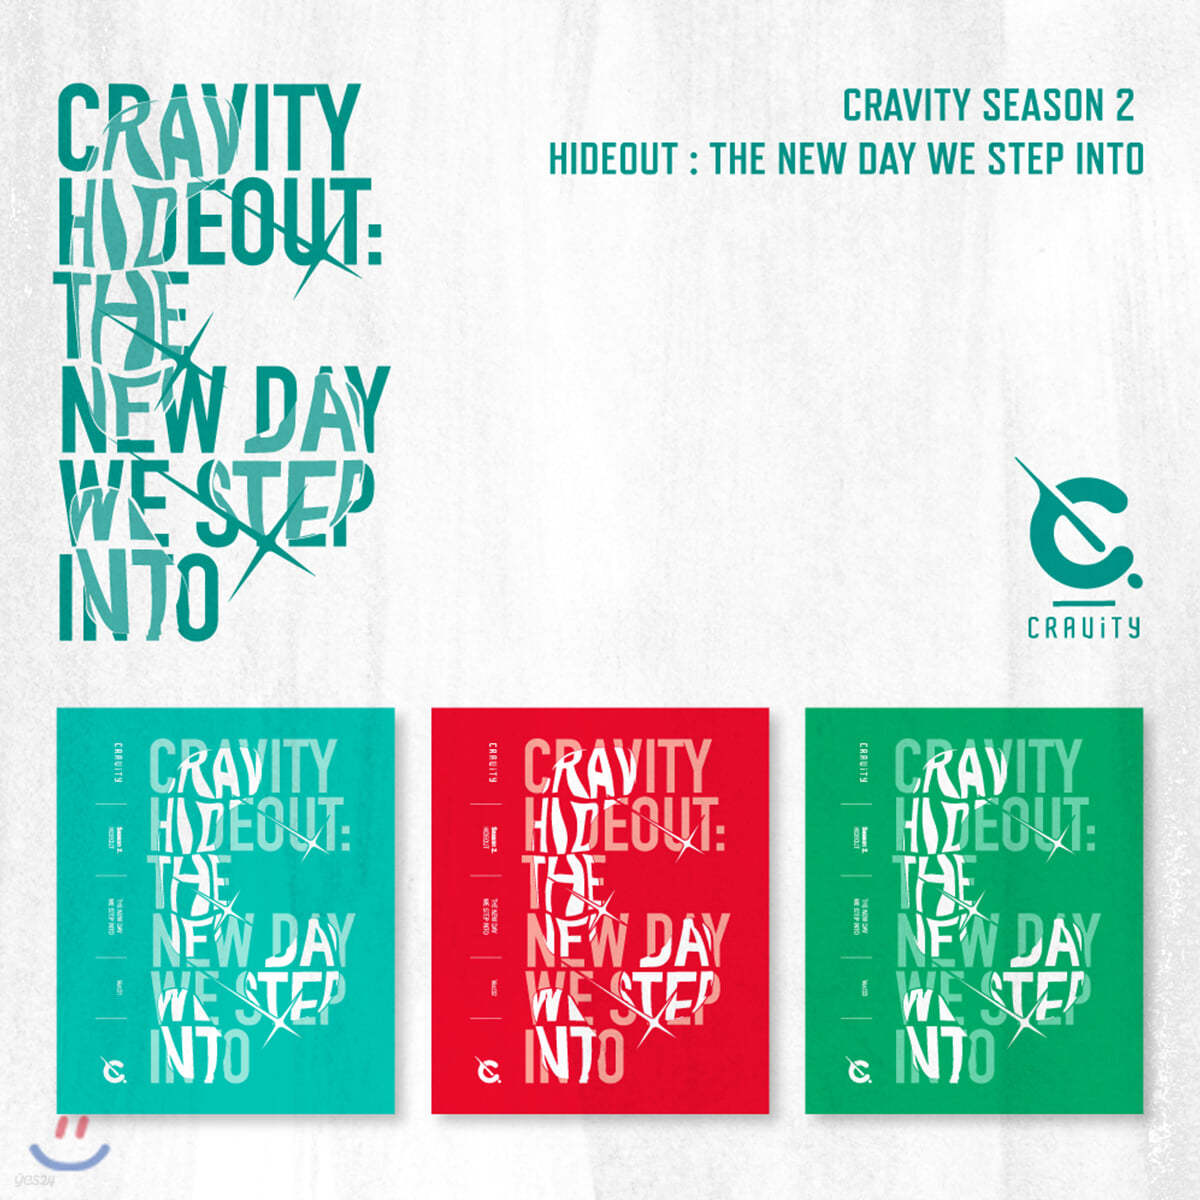 CRAVITY (크래비티) - CRAVITY SEASON2. [HIDEOUT: THE NEW DAY WE STEP INTO] [3종 중 랜덤 1종 발송]